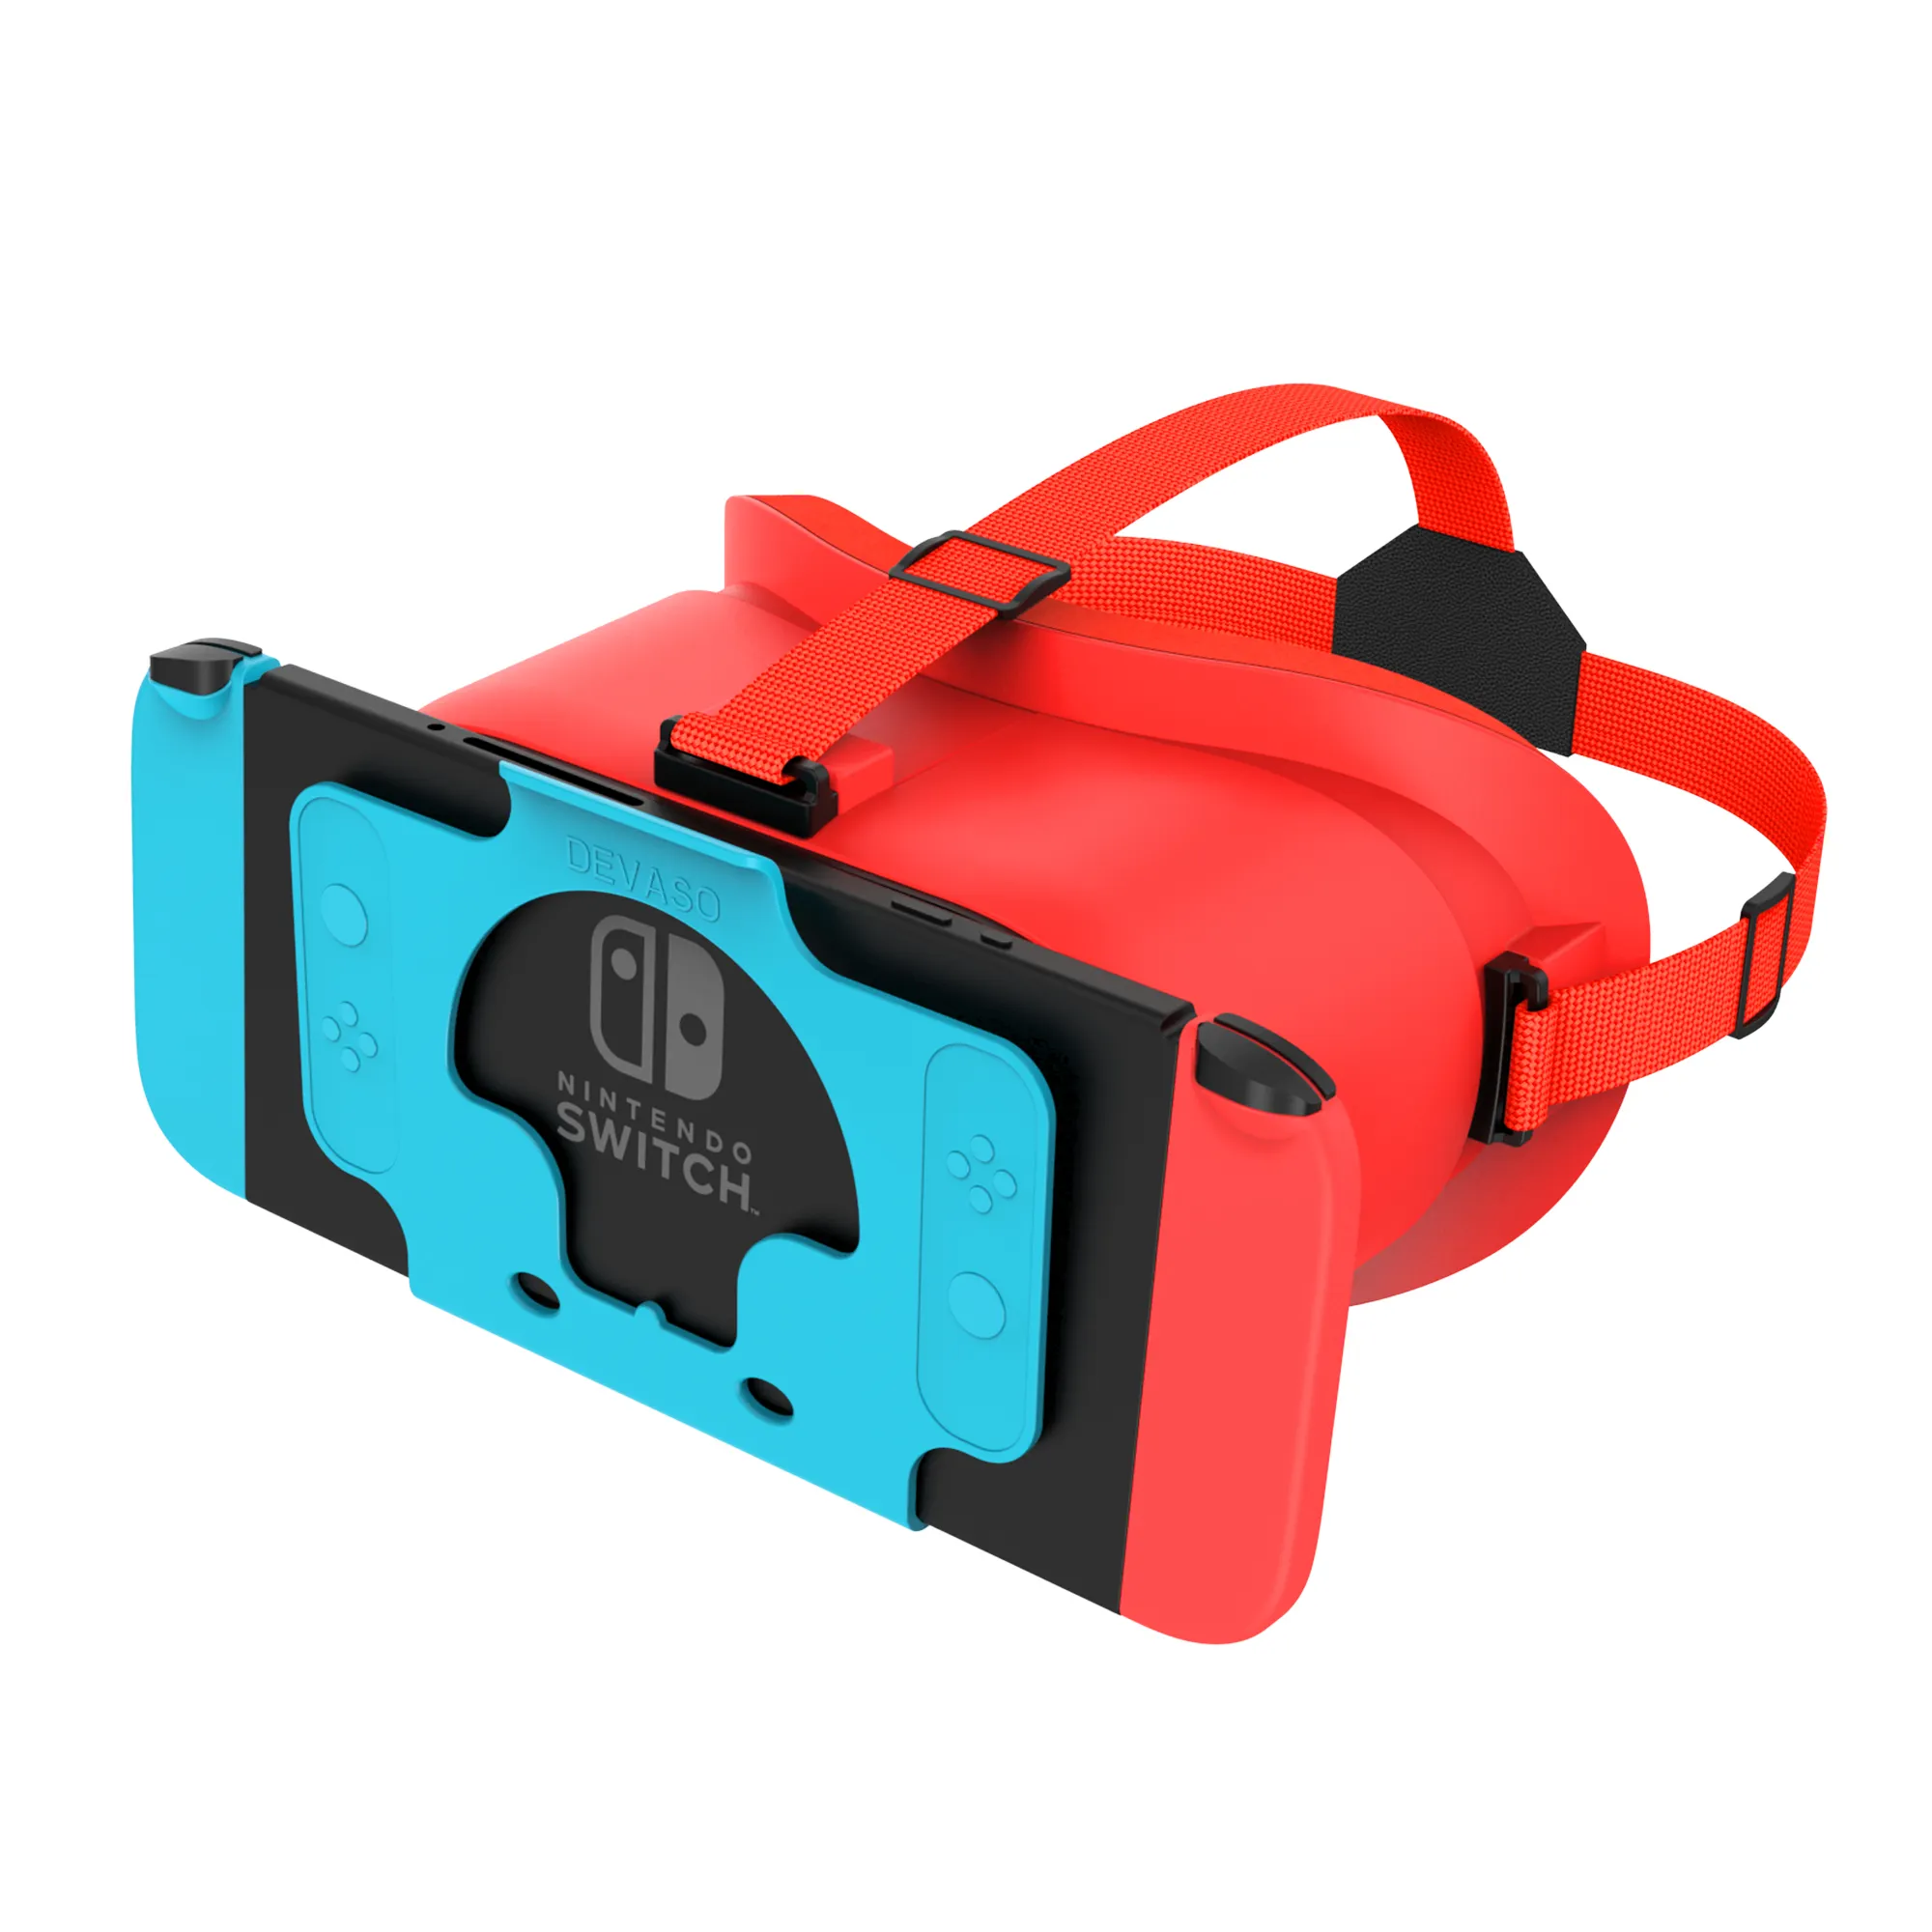 Devaso Vr Headset 3d Hd Grote Lens Bril Voor Nintendo Switch/ Switch Oled Game Console Accessoires